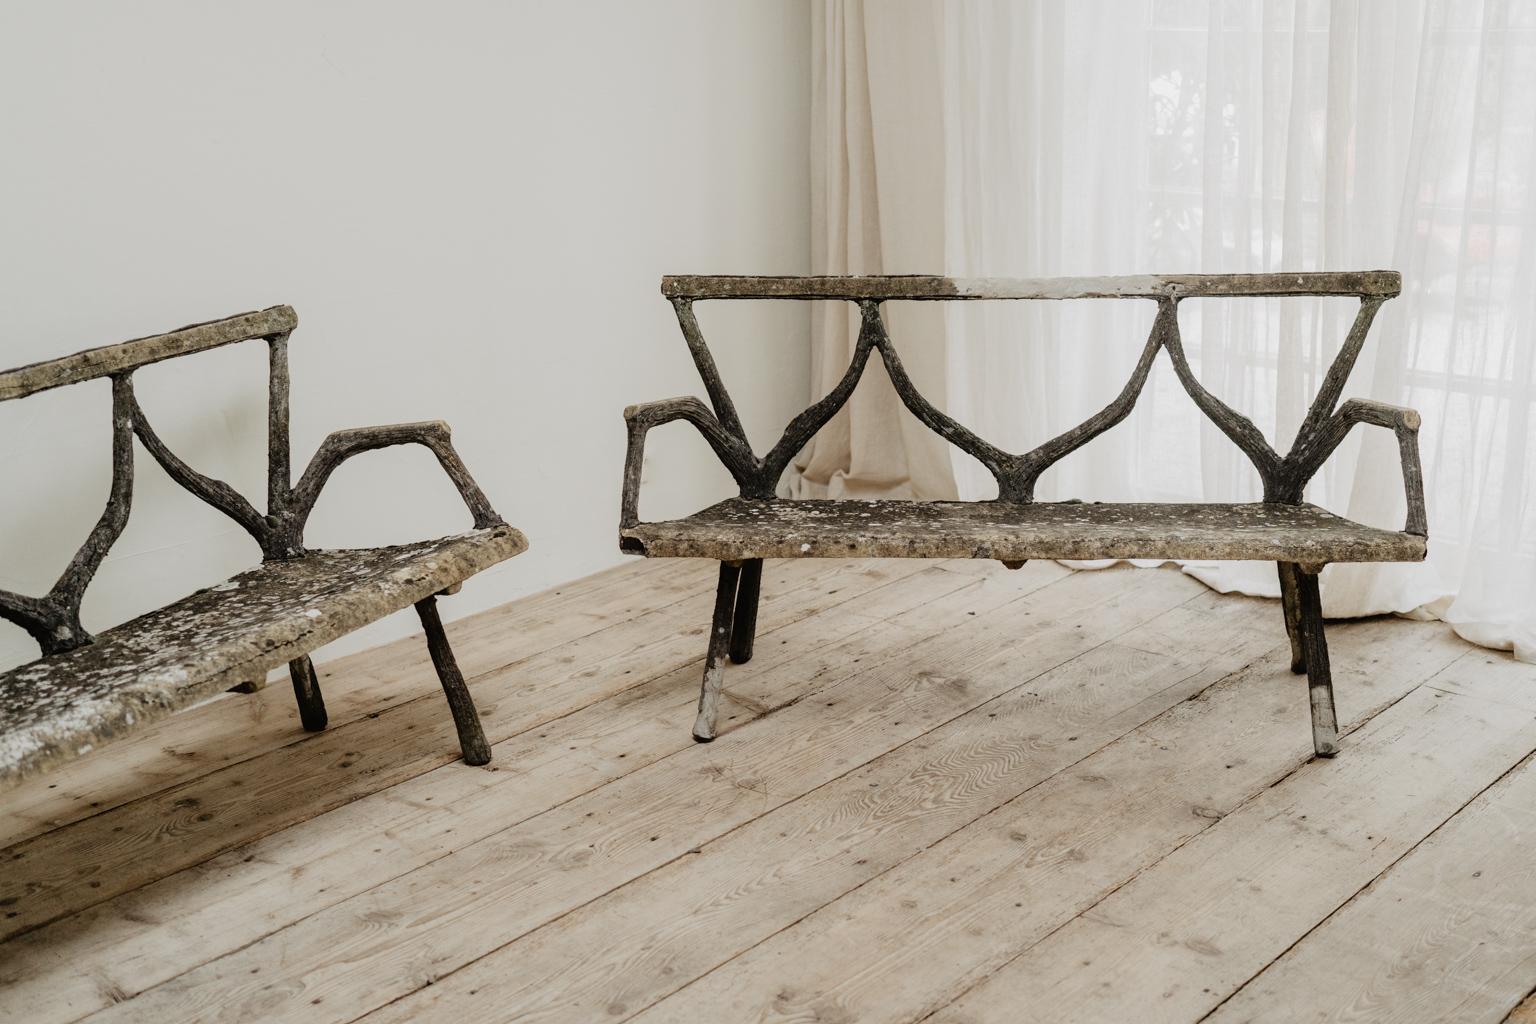 These beautiful weathered benches came out of a French castle garden, great design,
faux bois cement, some restorations, sturdy and smart...